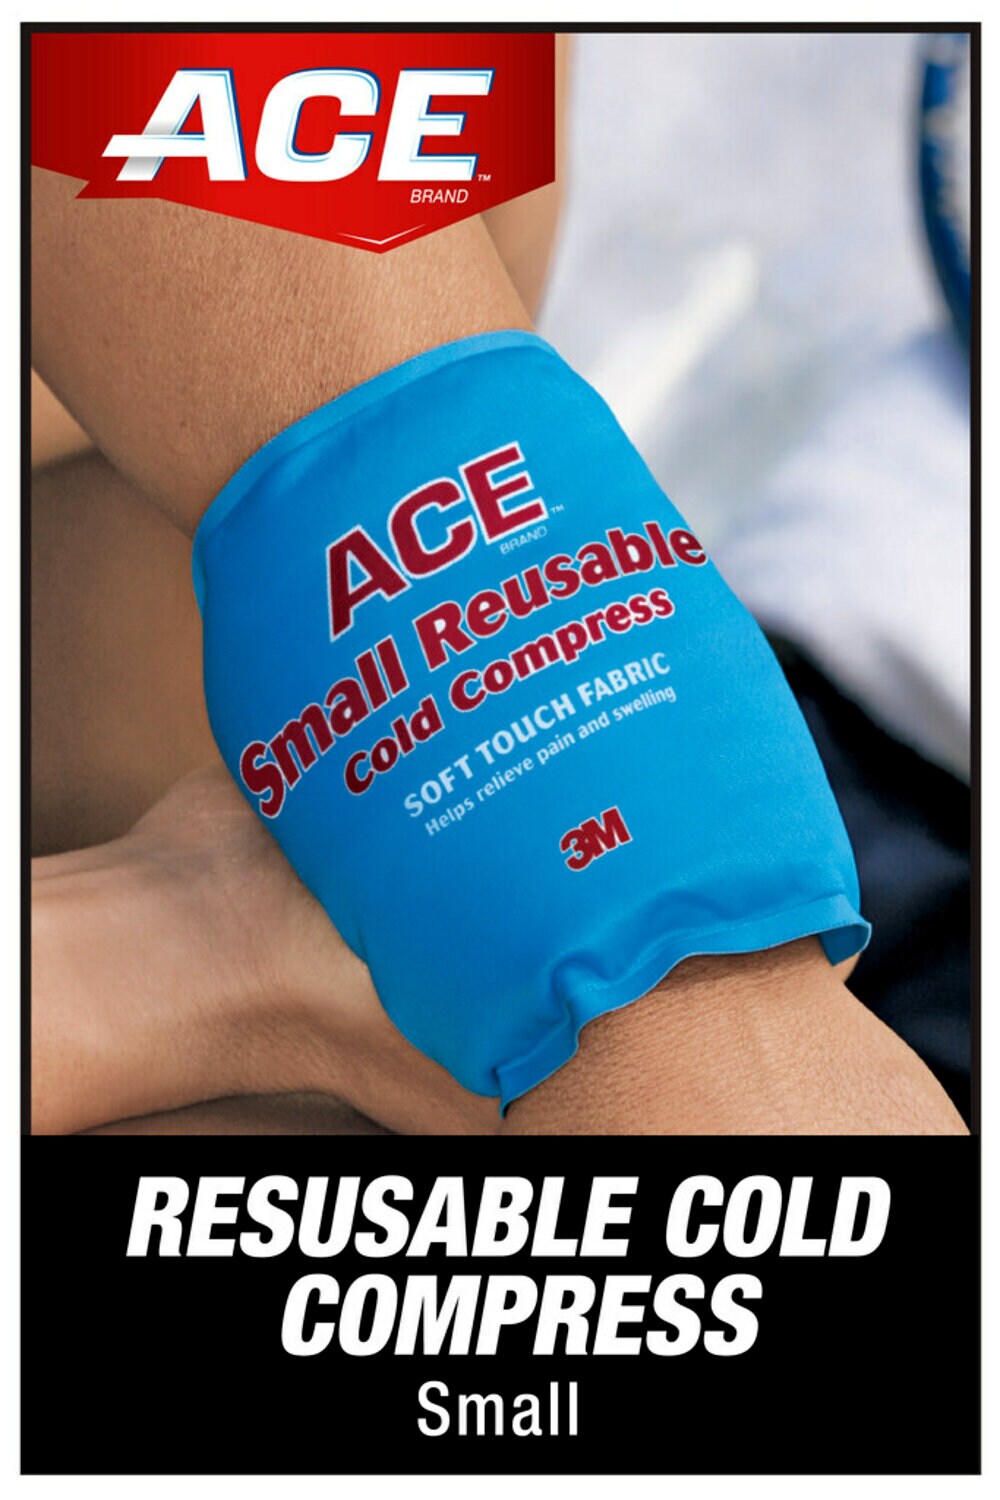 7010311211 - ACE Reusable Cold Compress, 207516, Small